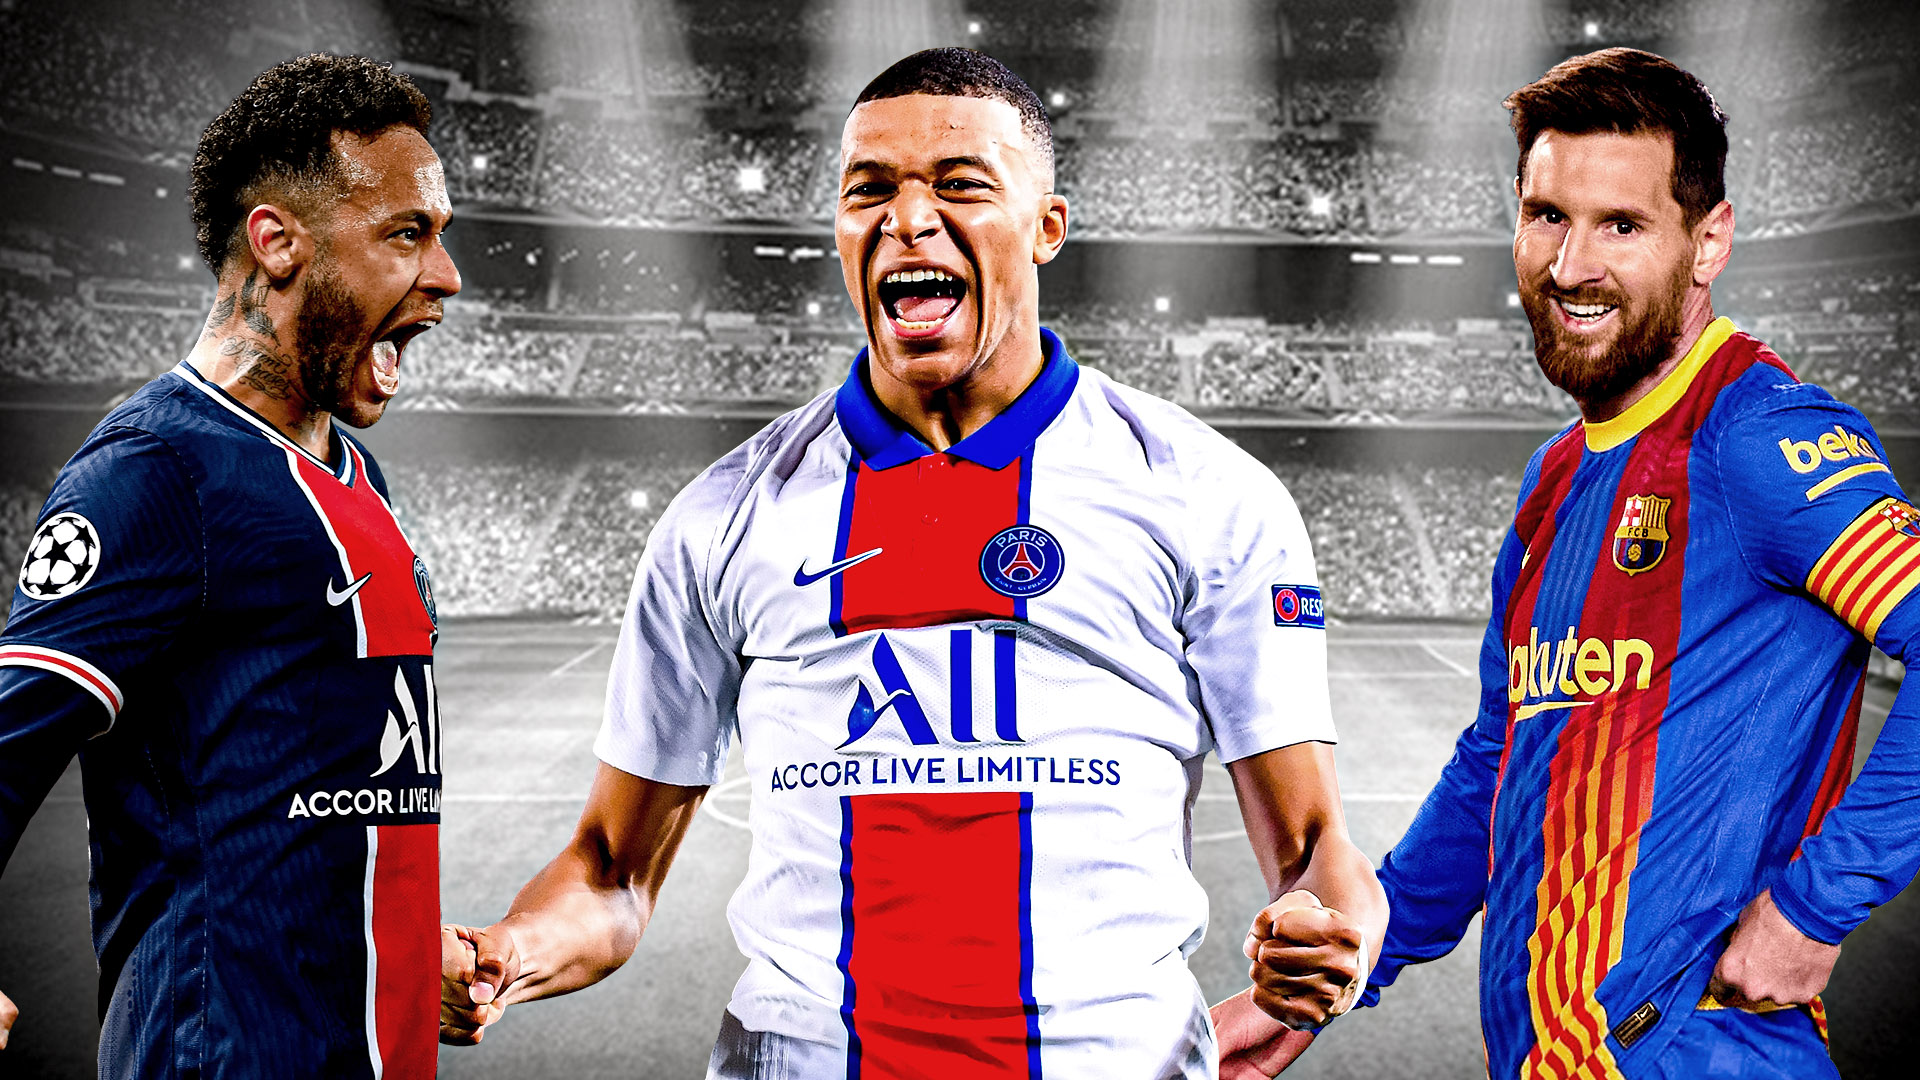 Neymar Und Mbappe Wallpaper : How Rich Is Mbappe / Explore and download ...